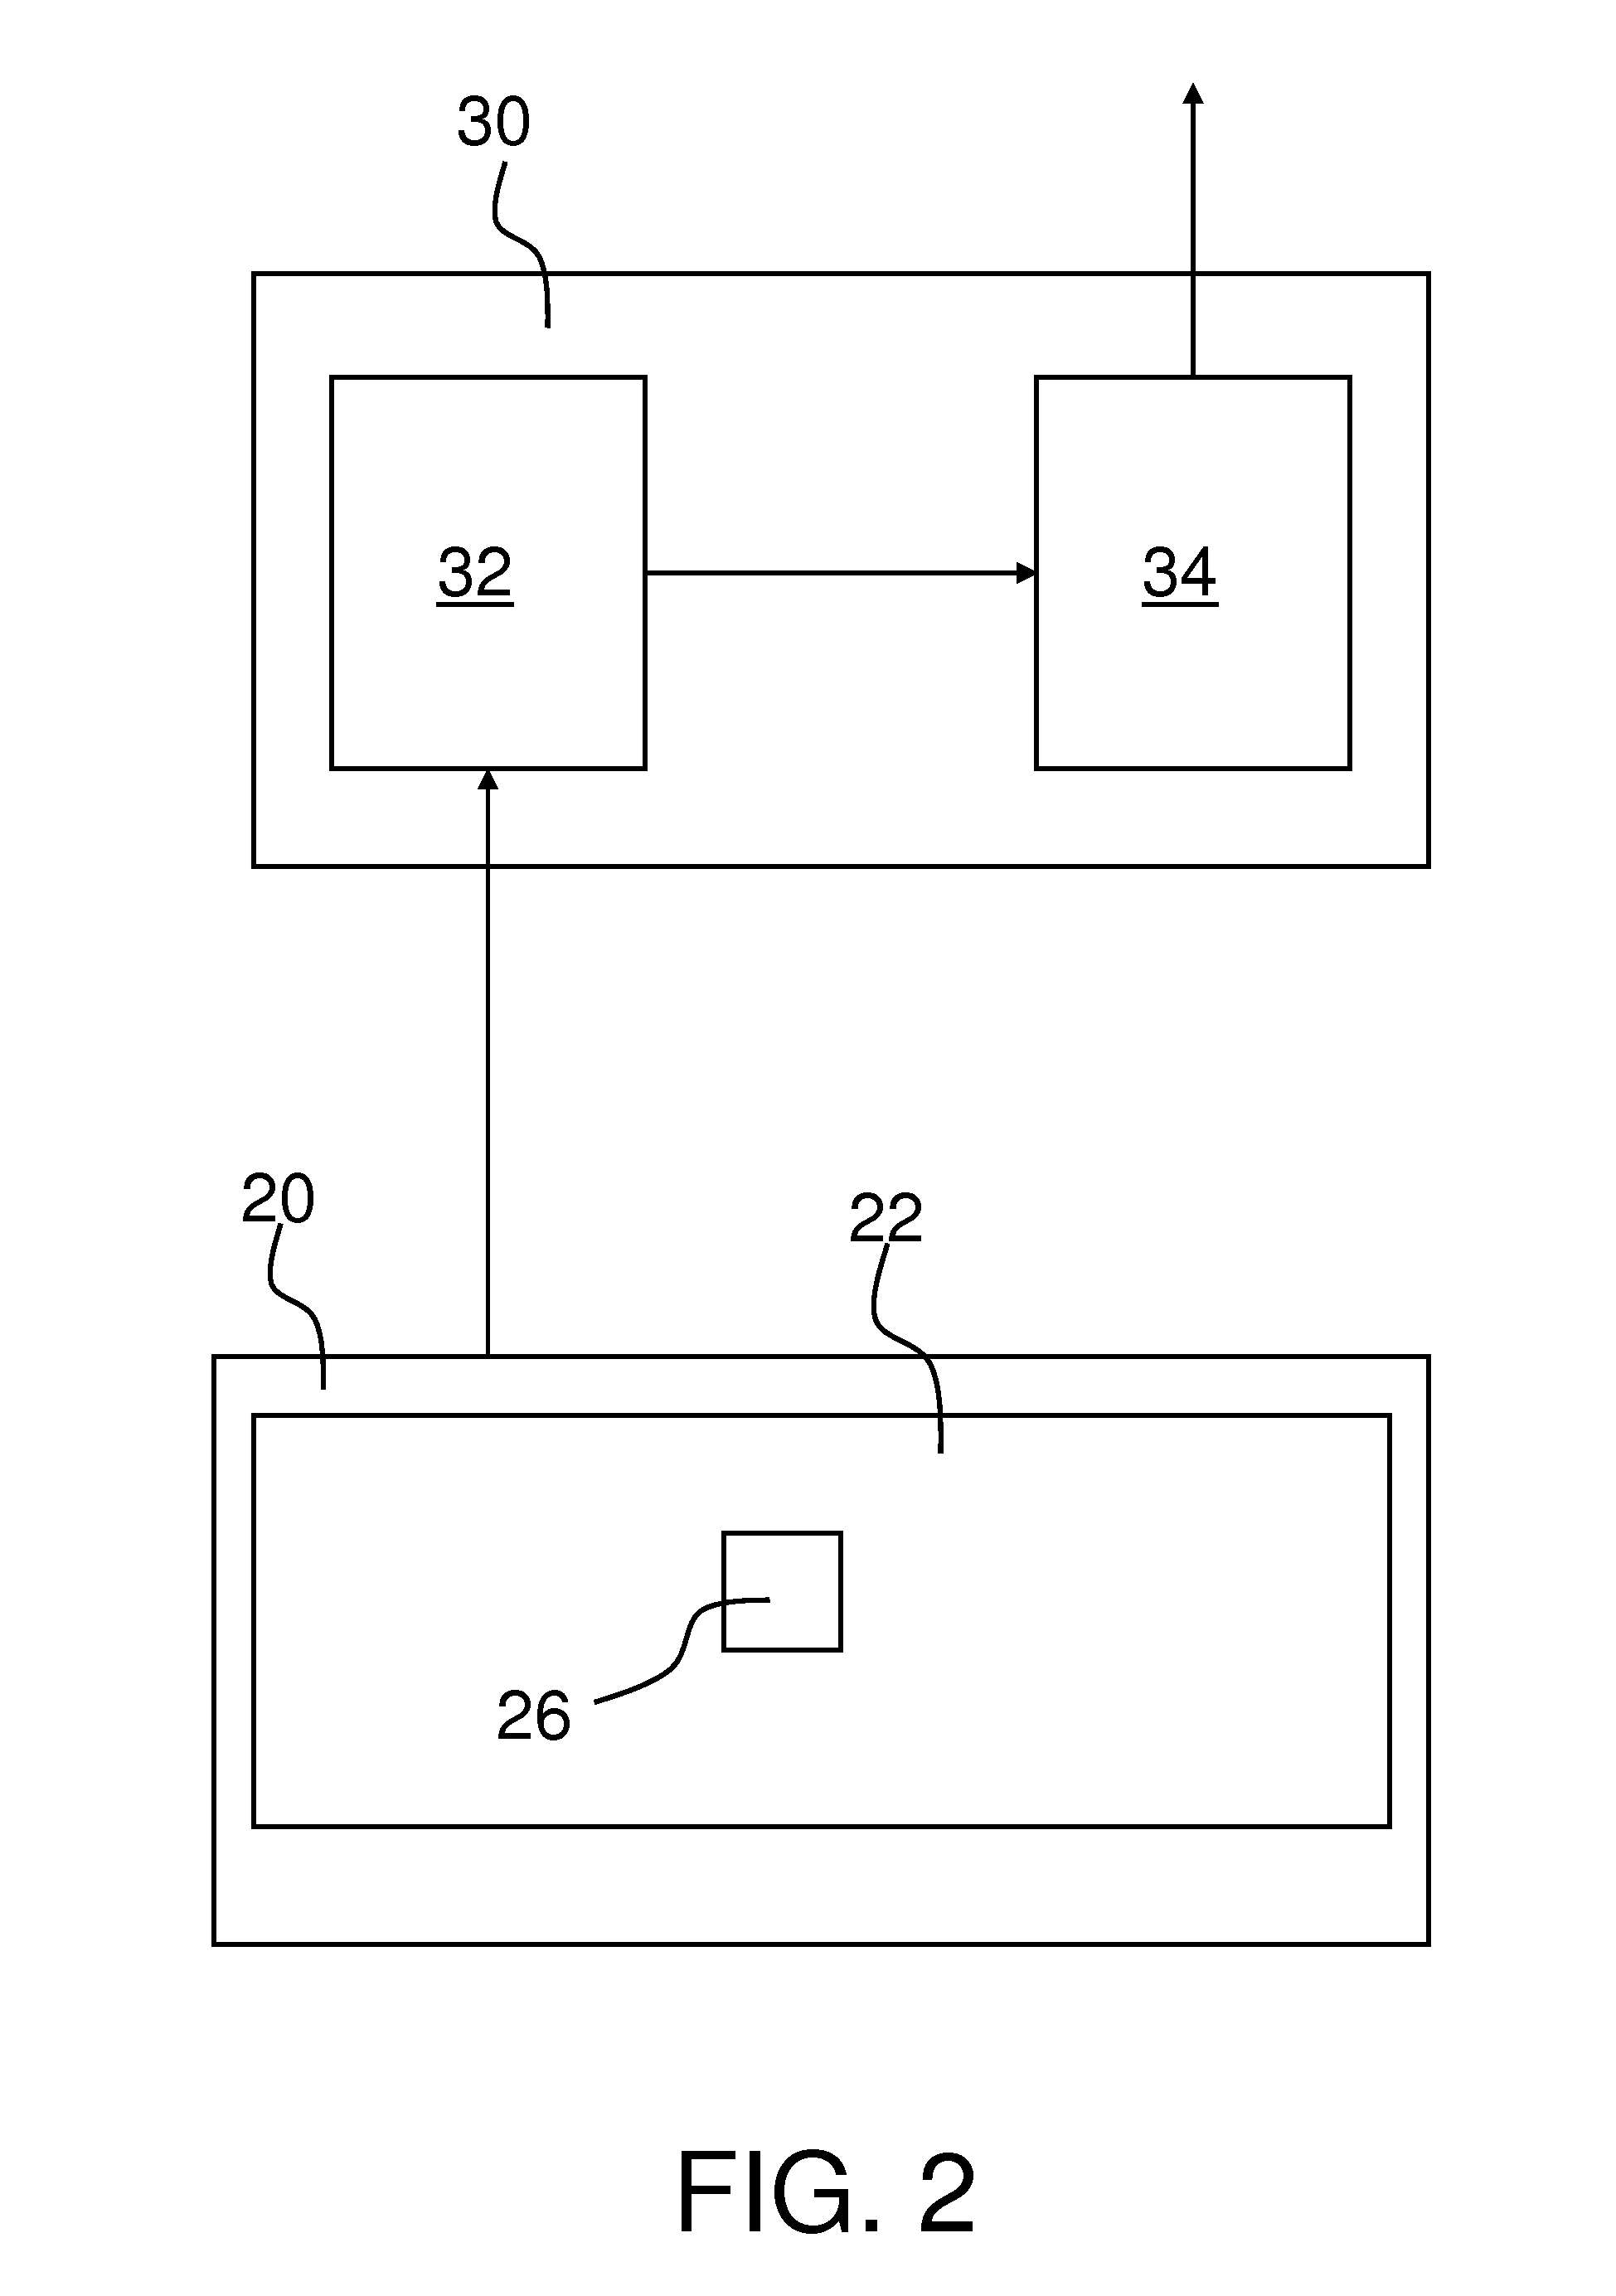 System for Performing a Co-Simulation and/or Emulation of Hardware and Software